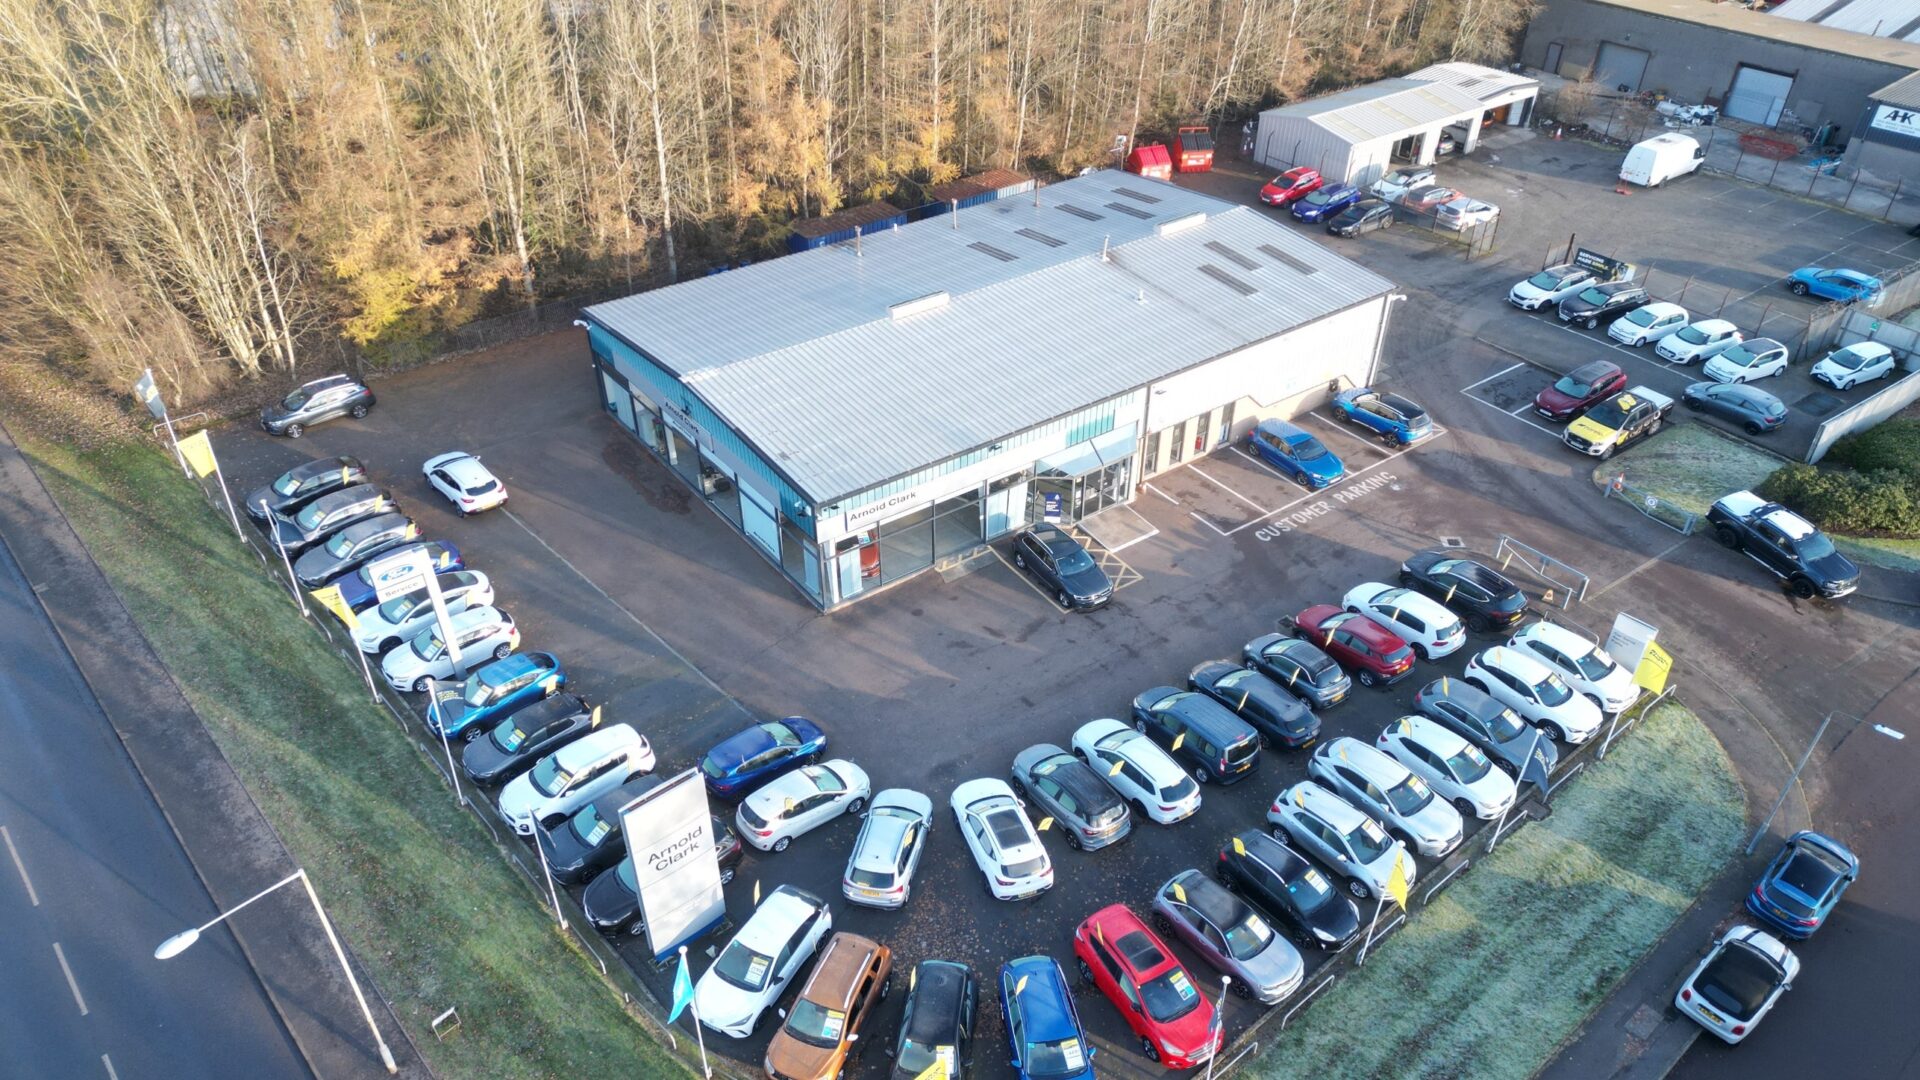 Arnold Clark instructs Shepherd to set closing date for offers on modern car showroom in prime location in Strathaven